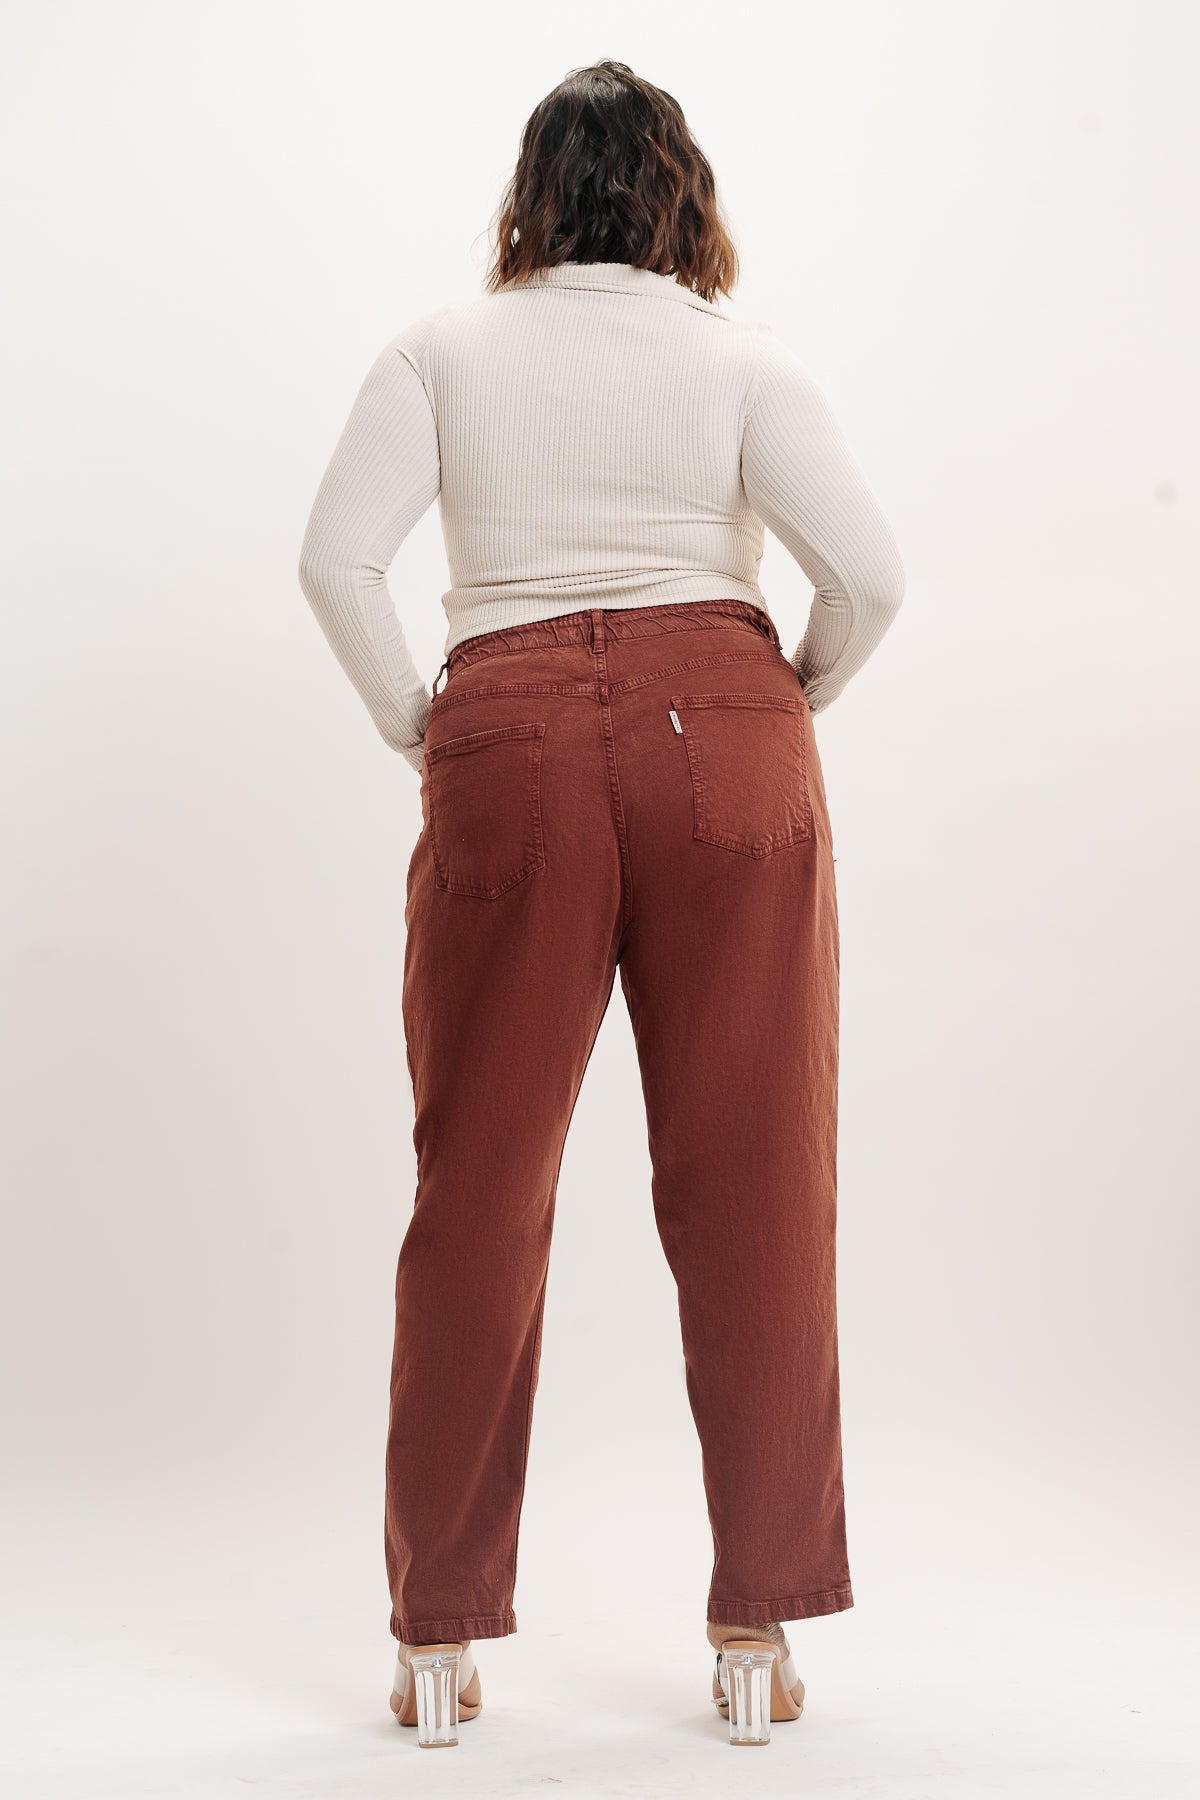 CURVE BROWN ELASTICATED MOM JEANS